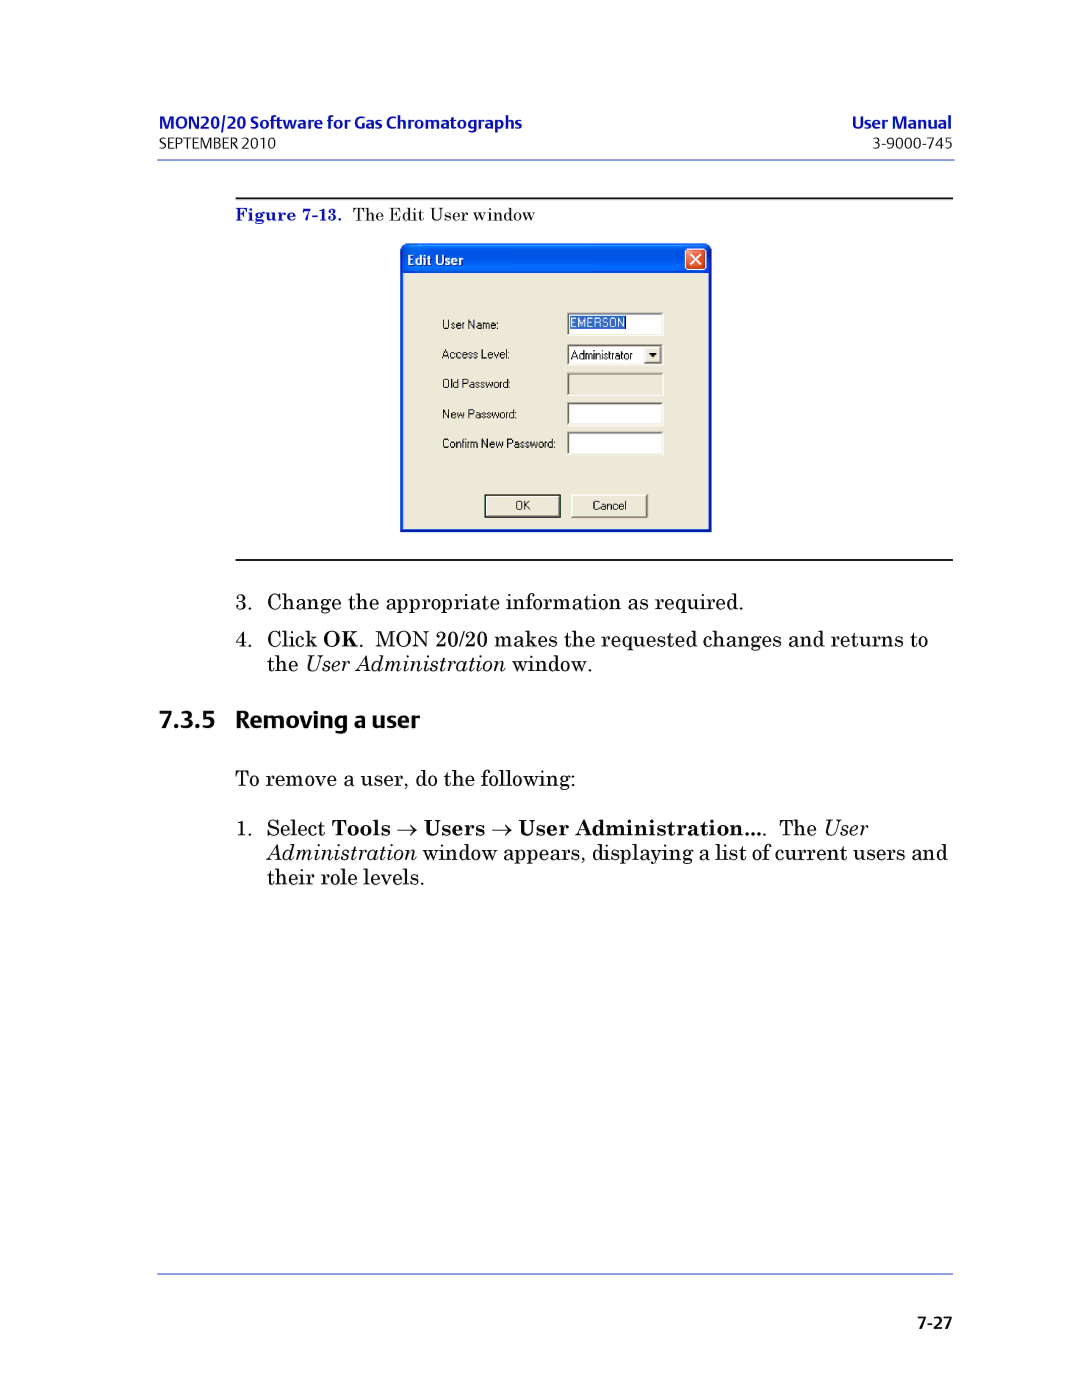 Emerson Process Management 3-9000-745 manual Removing a user, The Edit User window 